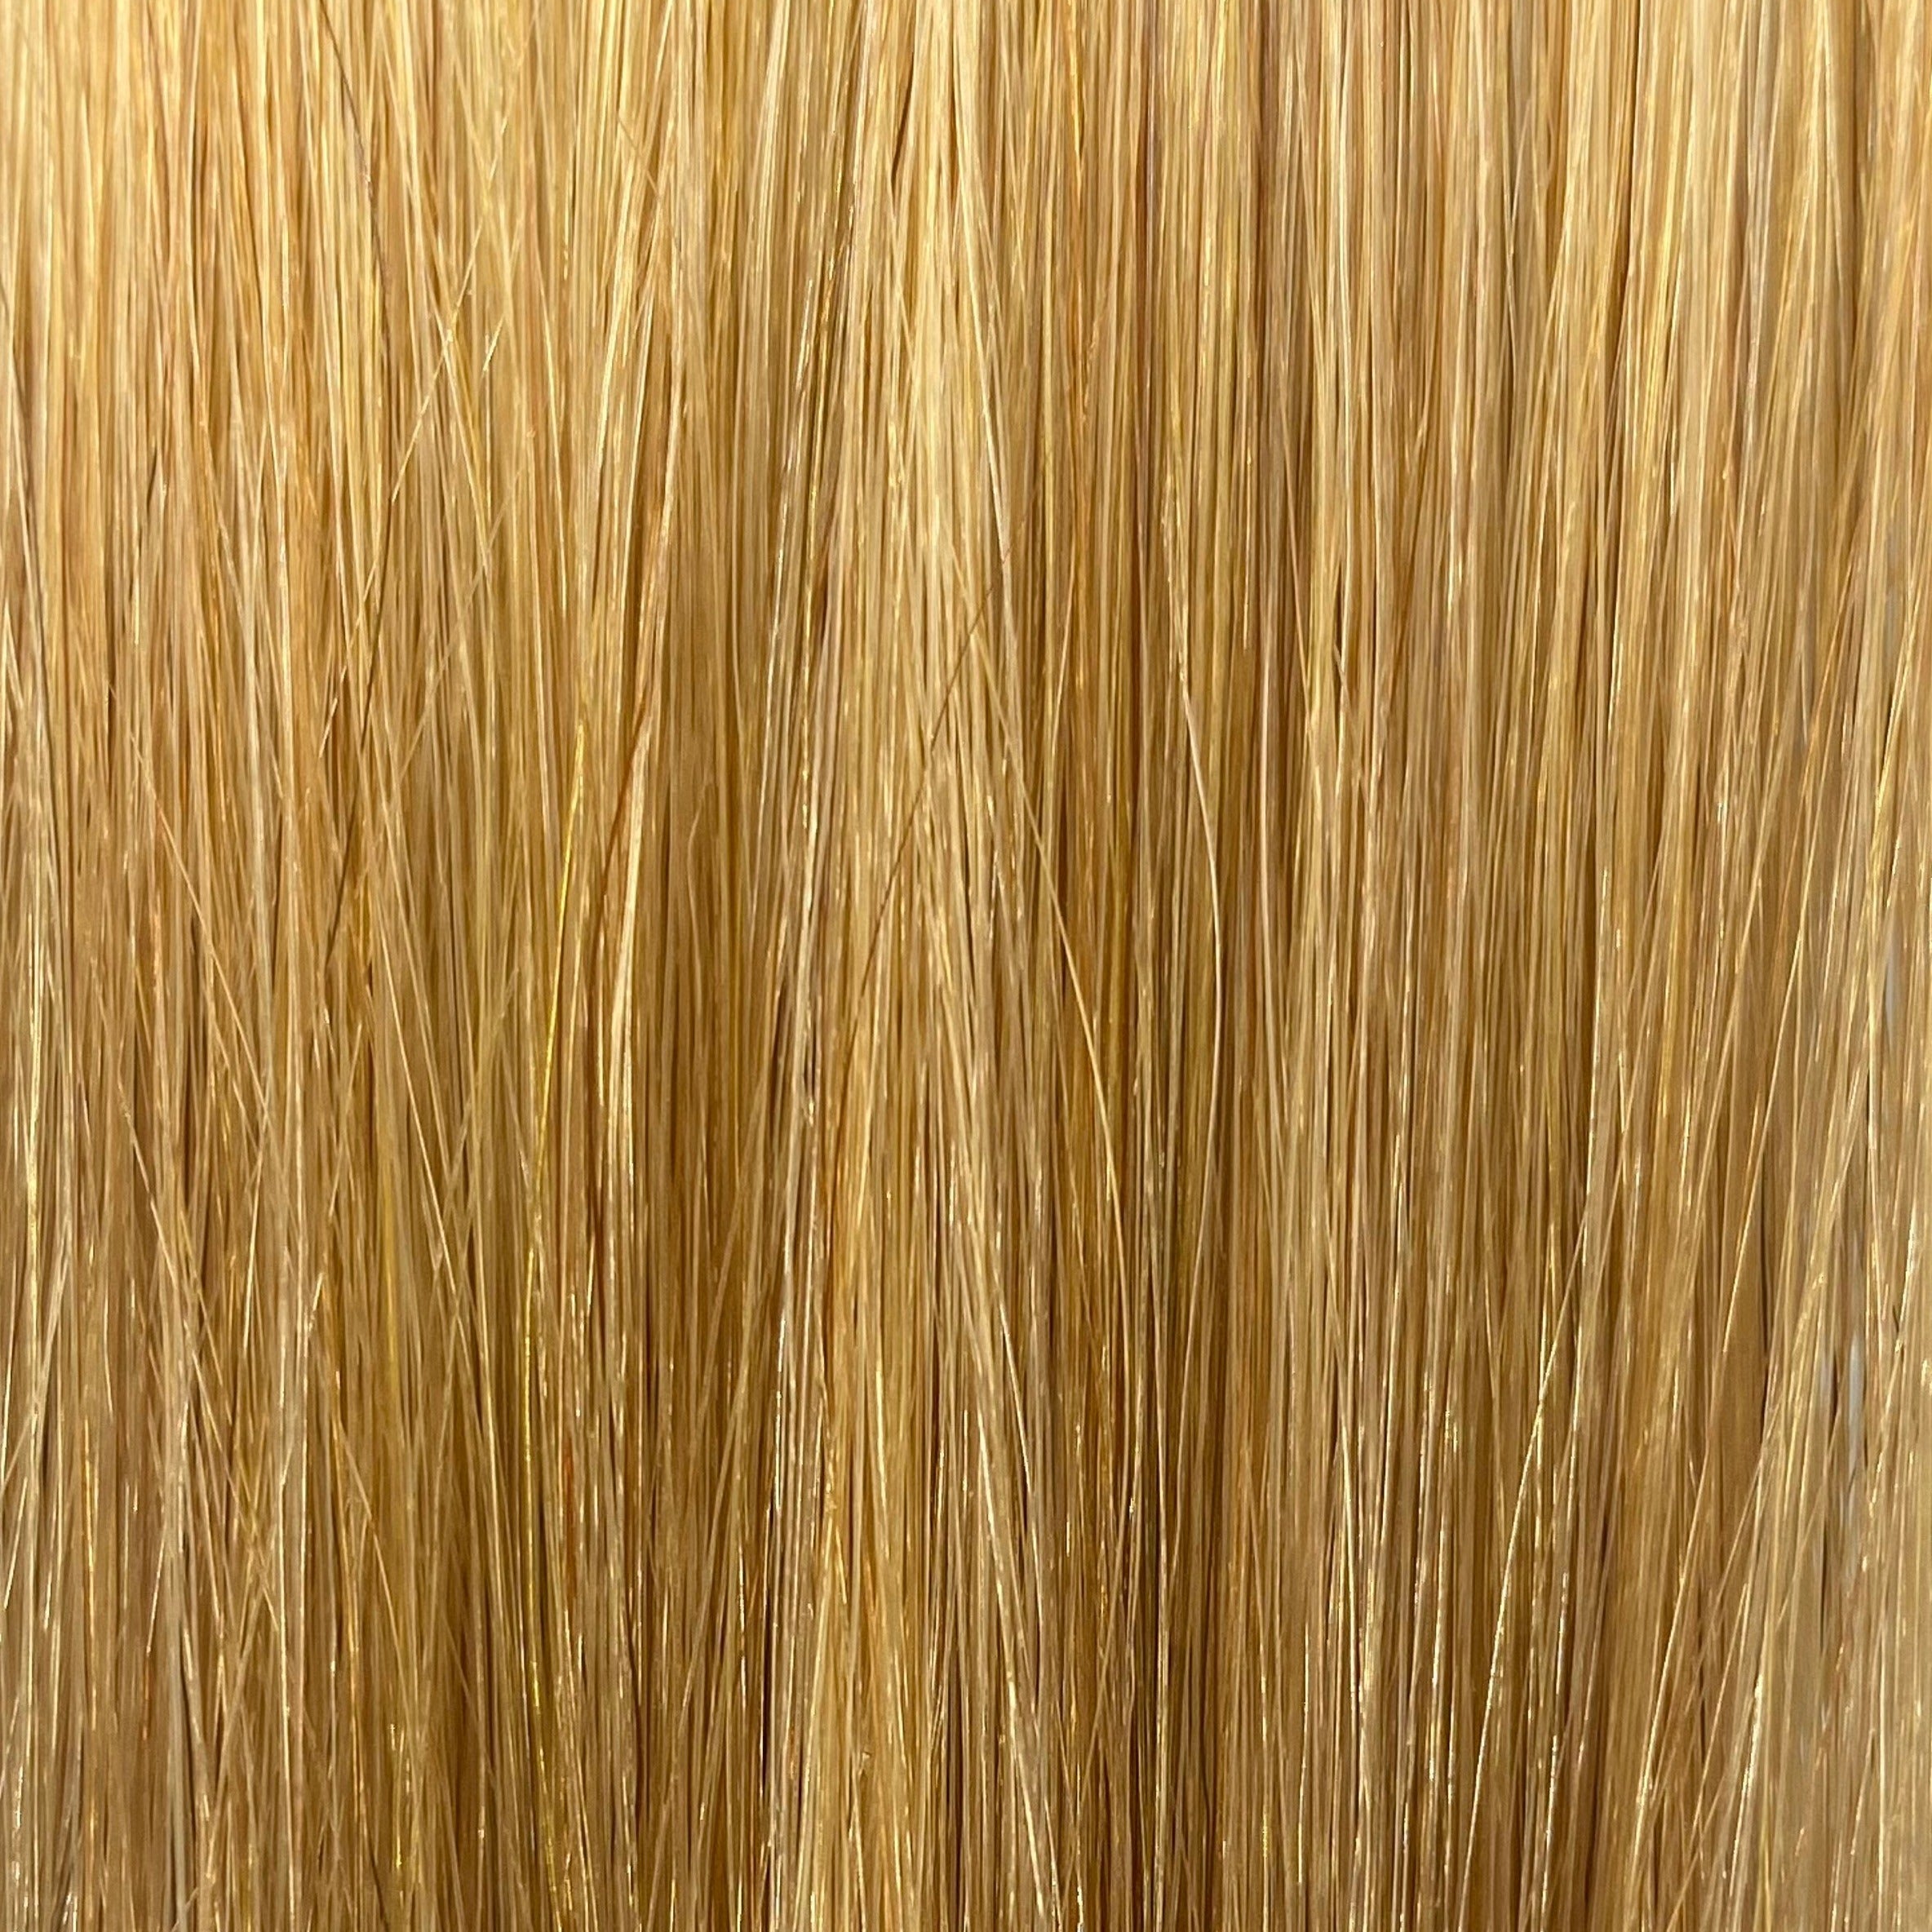 FUSION #DB3 GOLDEN BLONDE 40CM/ 16 INCHES  -  17.5 GRAMS - Image 1